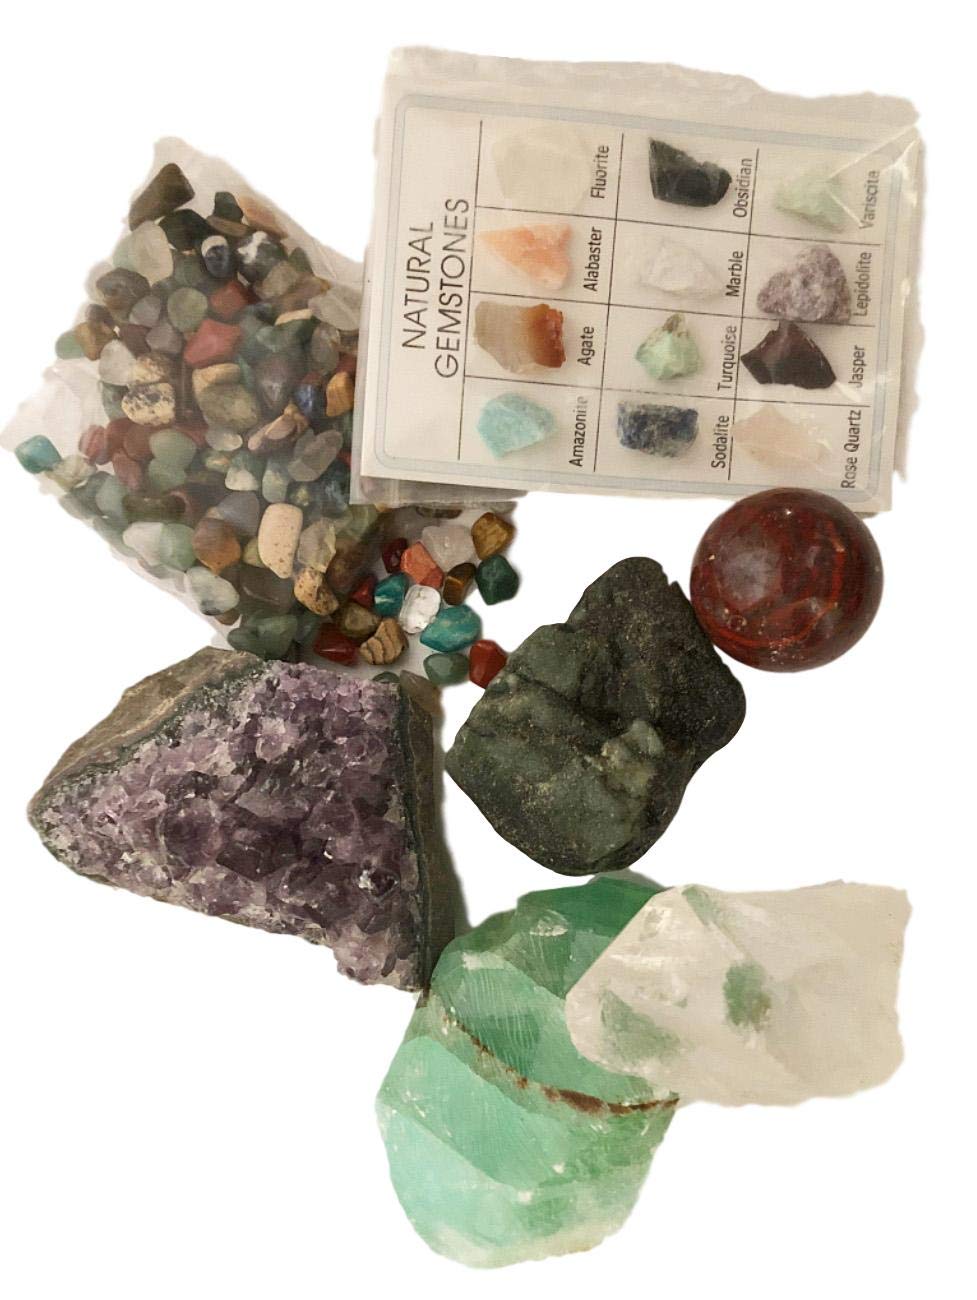 Rock & Mineral Gift Collection - Real Emerald, Amethyst, Calcite, Quartz, Jasper and Polished agates with Bonus Mineral ID Chart - 100+ Pieces with Gift Box - dinosaursrocksuperstore